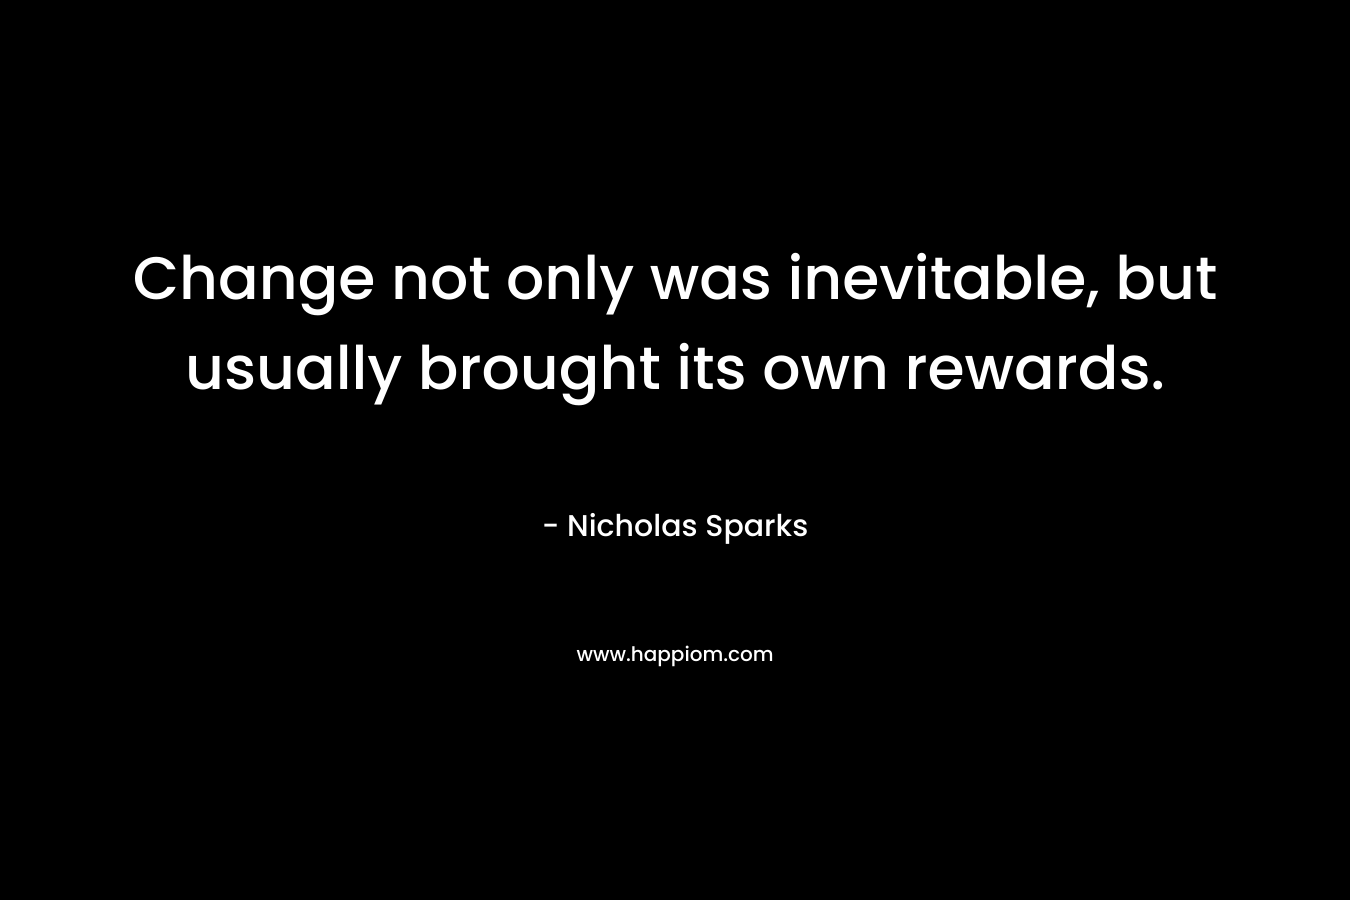 Change not only was inevitable, but usually brought its own rewards.